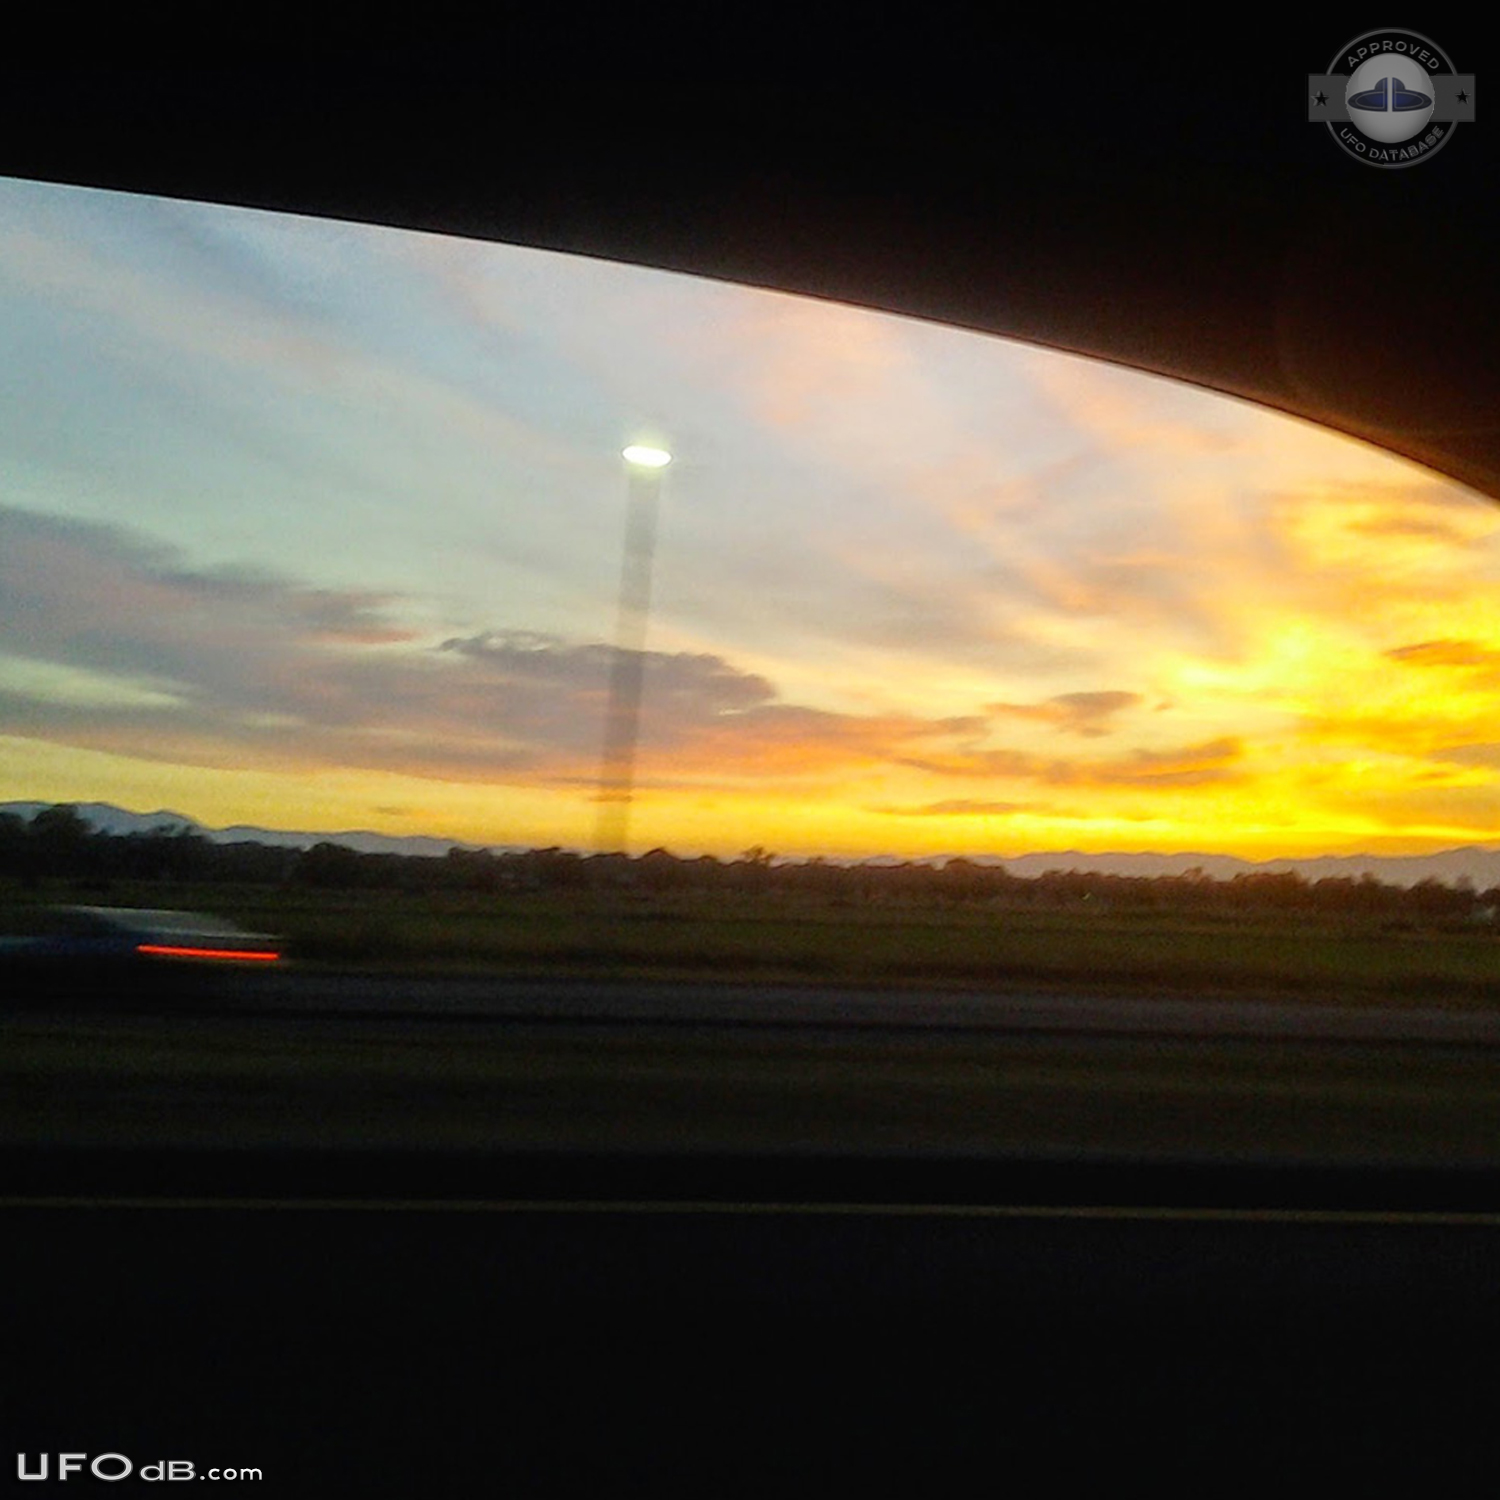 UFO saucer caught from car in Cottonwood California USA 2014 UFO Picture #589-2